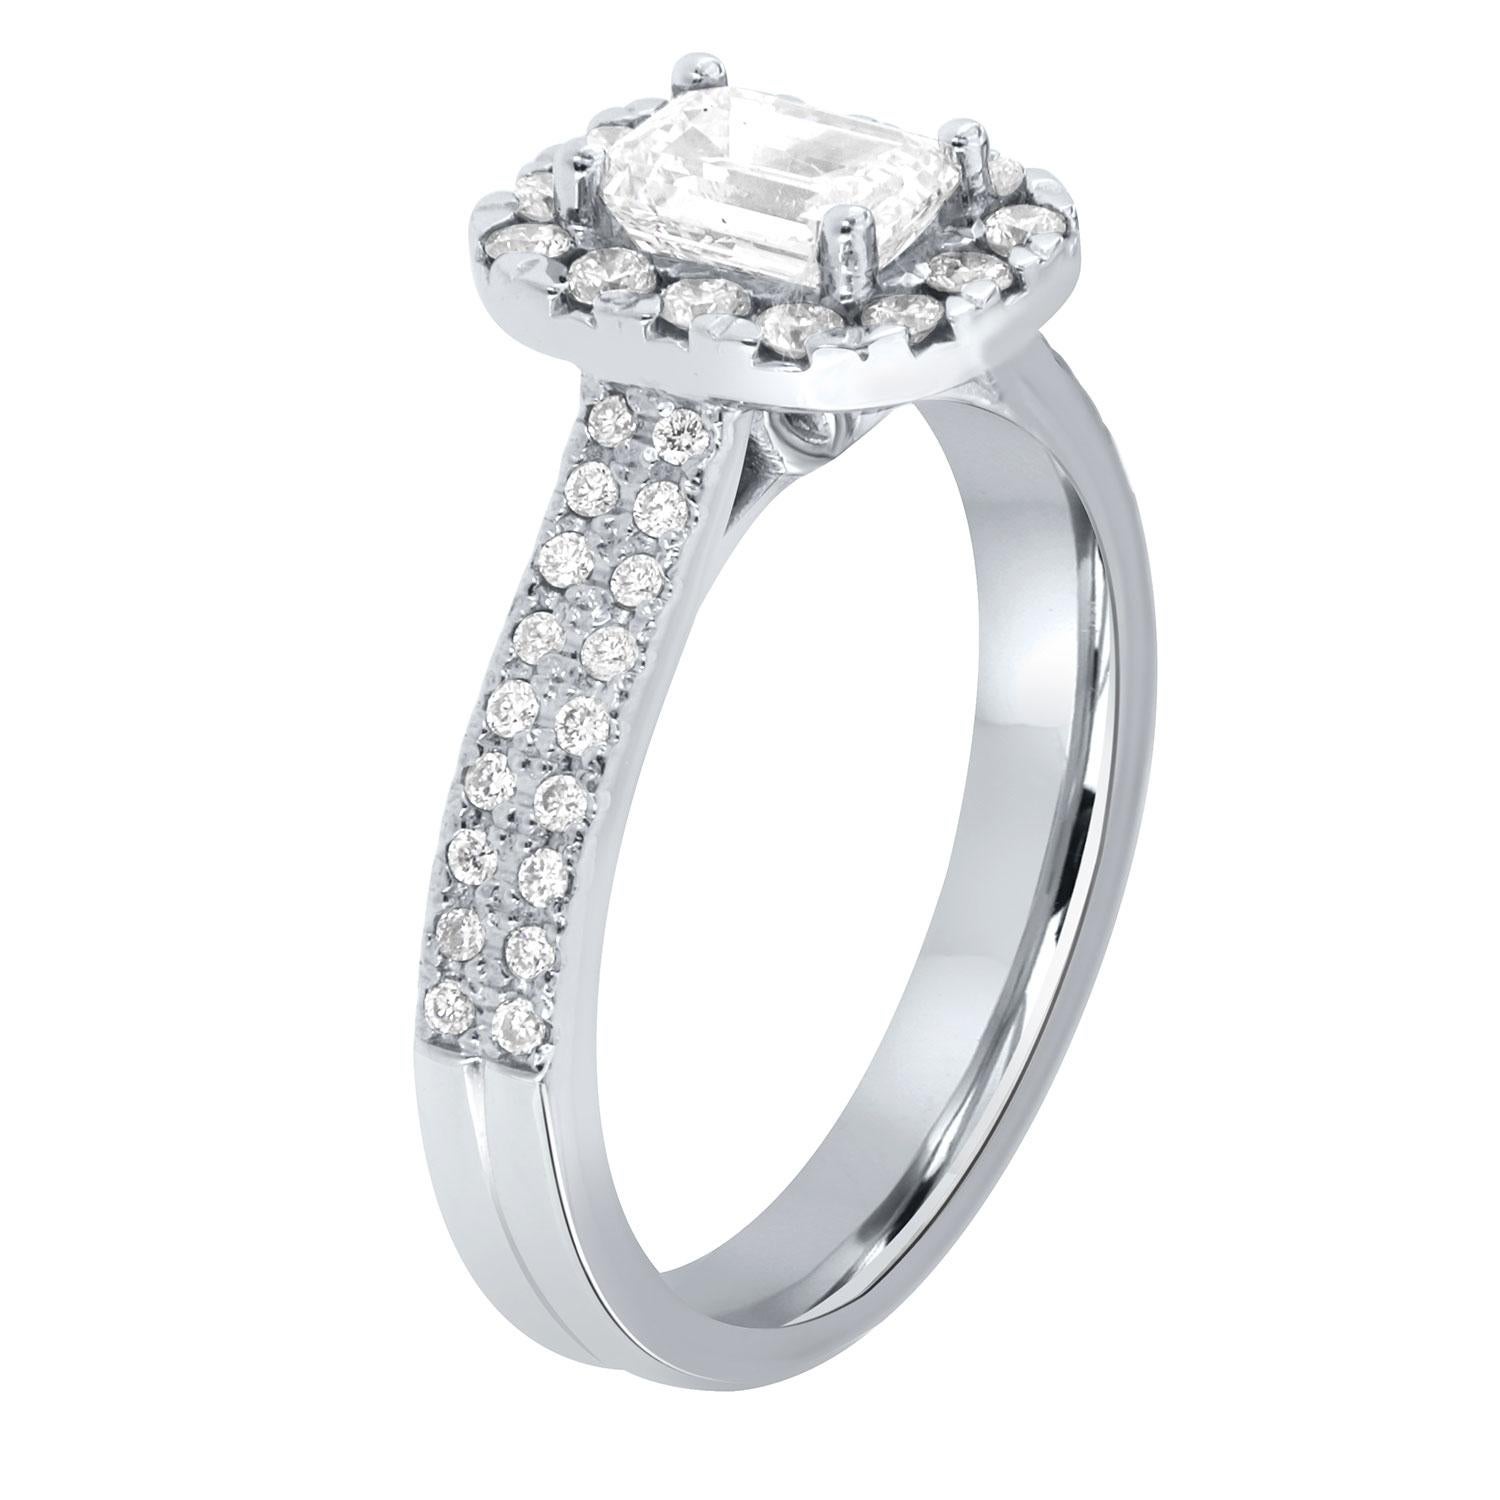 This stunning platinum setting features a 0.90 -Carat Emerald cut diamond GIA certified as an E color and vs2 in clarity. The center diamond is encircled by a Cushion-Shaped halo of brilliant round diamonds
on top of a 3.4 mm two-rows diamond band. 